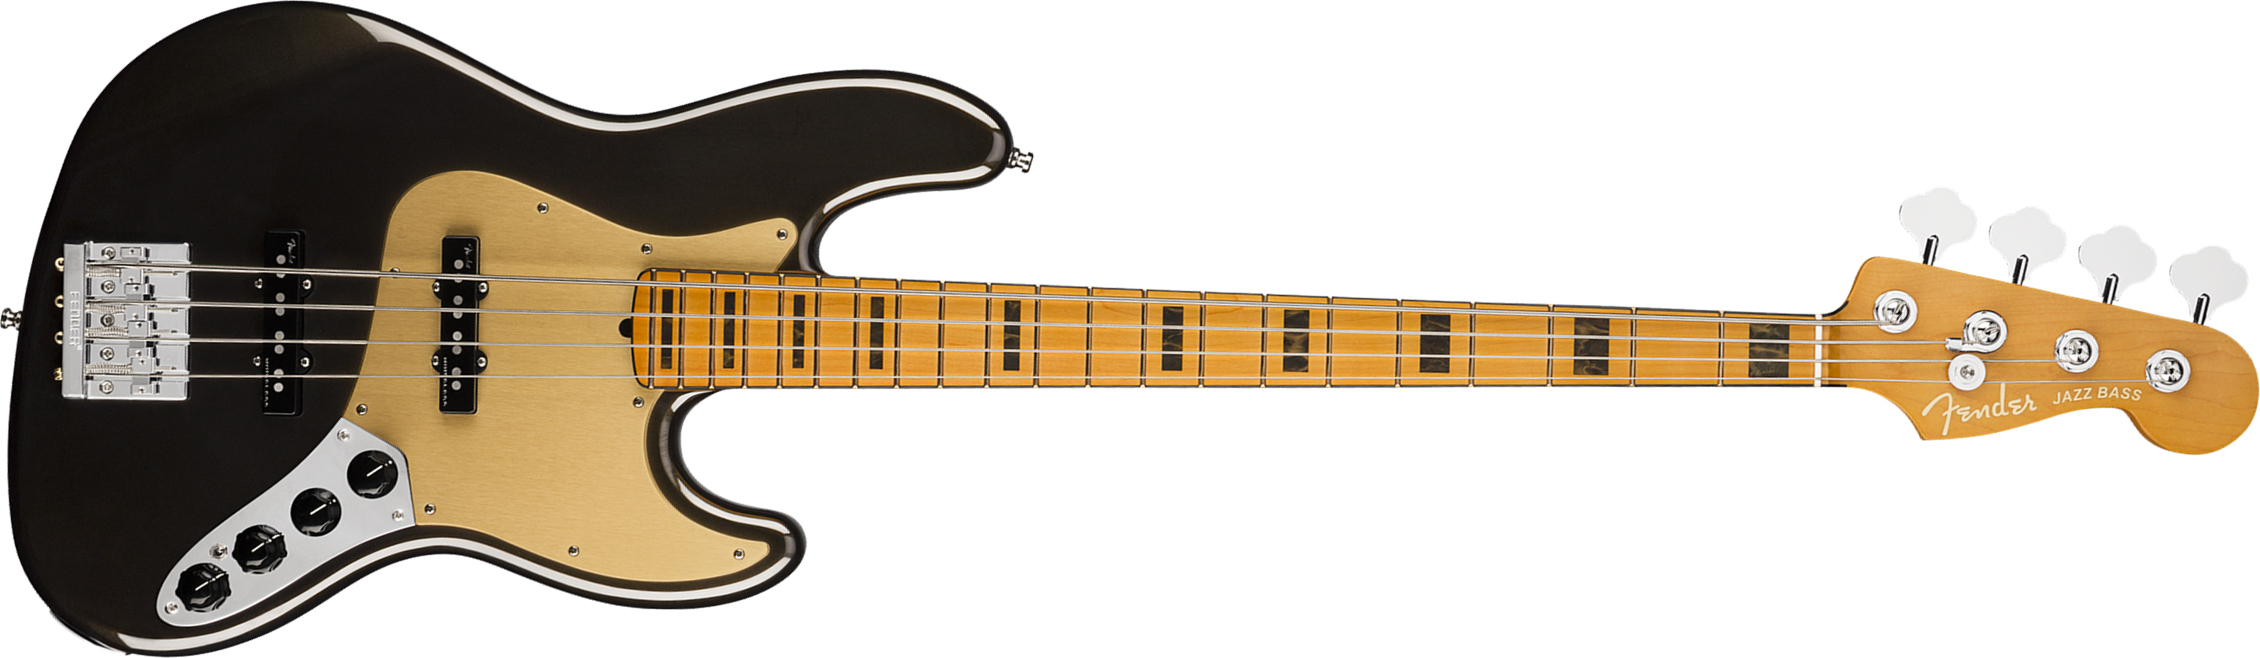 Fender Jazz Bass American Ultra 2019 Usa Mn - Texas Tea - Basse Électrique Solid Body - Main picture